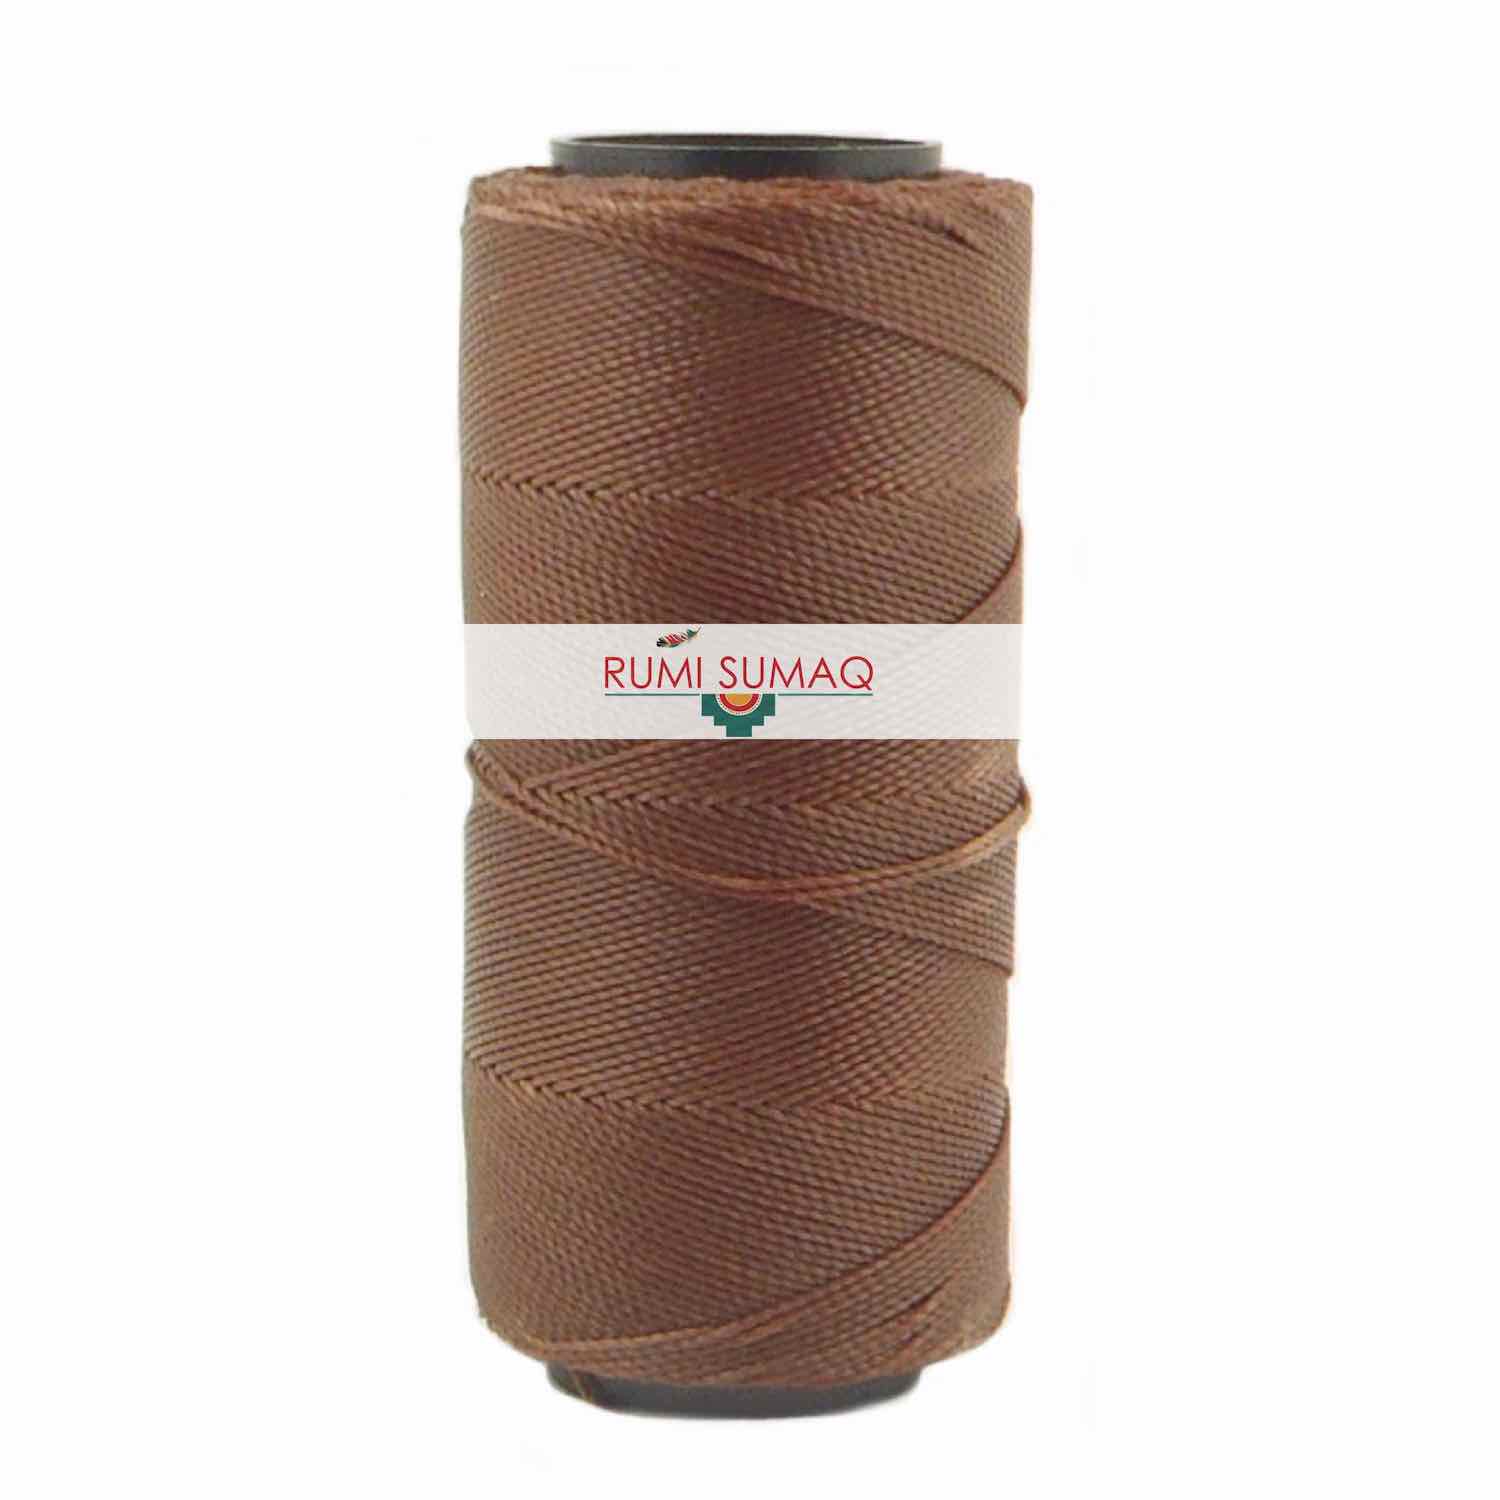 Settanyl 07-037 Chestnut Brown Waxed Polyester Cord | RUMI SUMAQ Waxed Threads for Macrame Jewelry, Pine Needle Baskets, Quilting, Leather working and Beading Projects